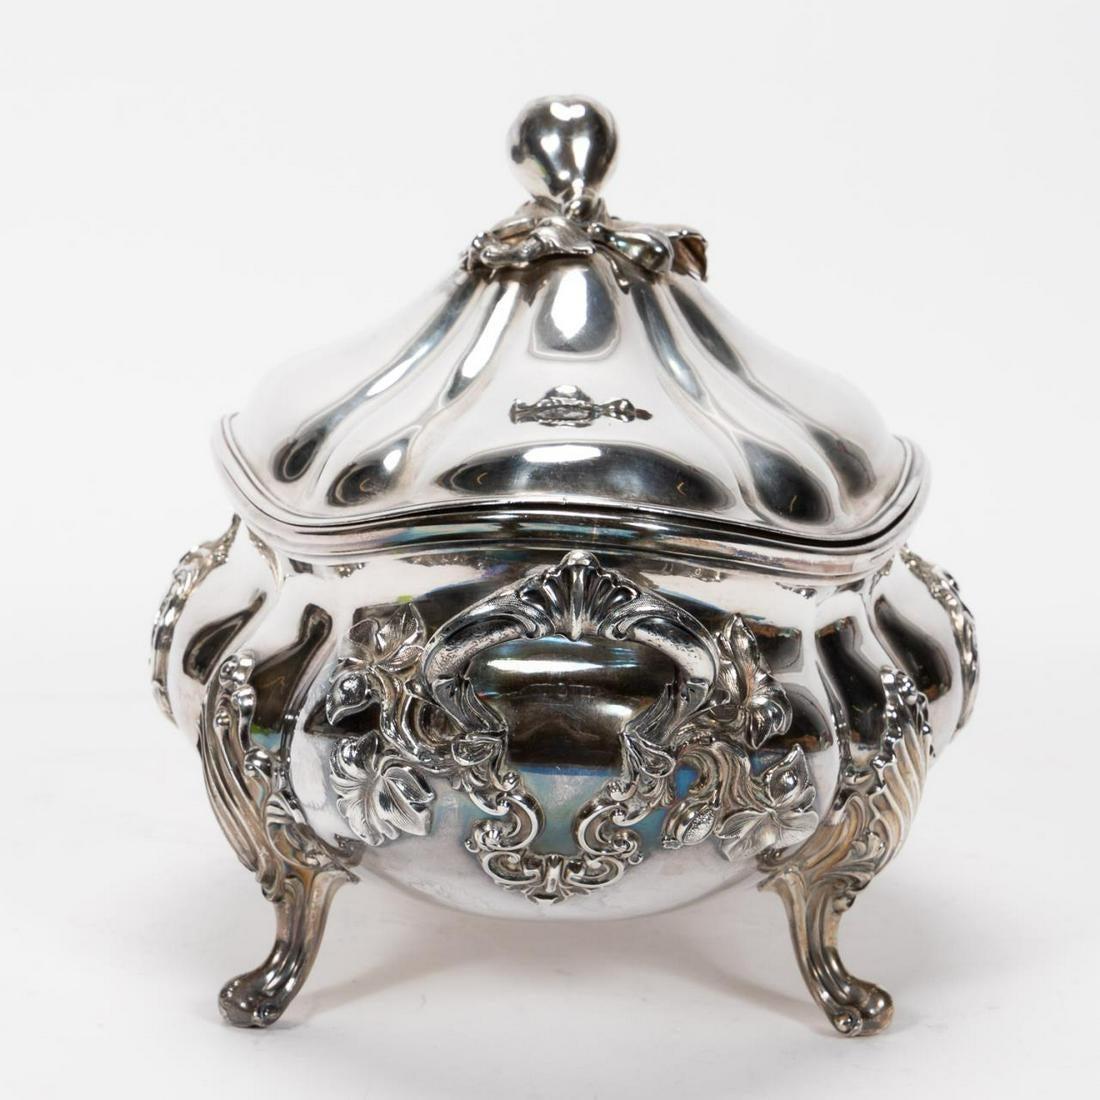 19th century old Sheffield plate armorial tureen
English, early 19th century. Old Sheffield plate silver covered tureen in the Rococo taste having a squash finial and cartouche bearing the arms of Logan-Home of Broomhouse and Edrom. Unmarked.